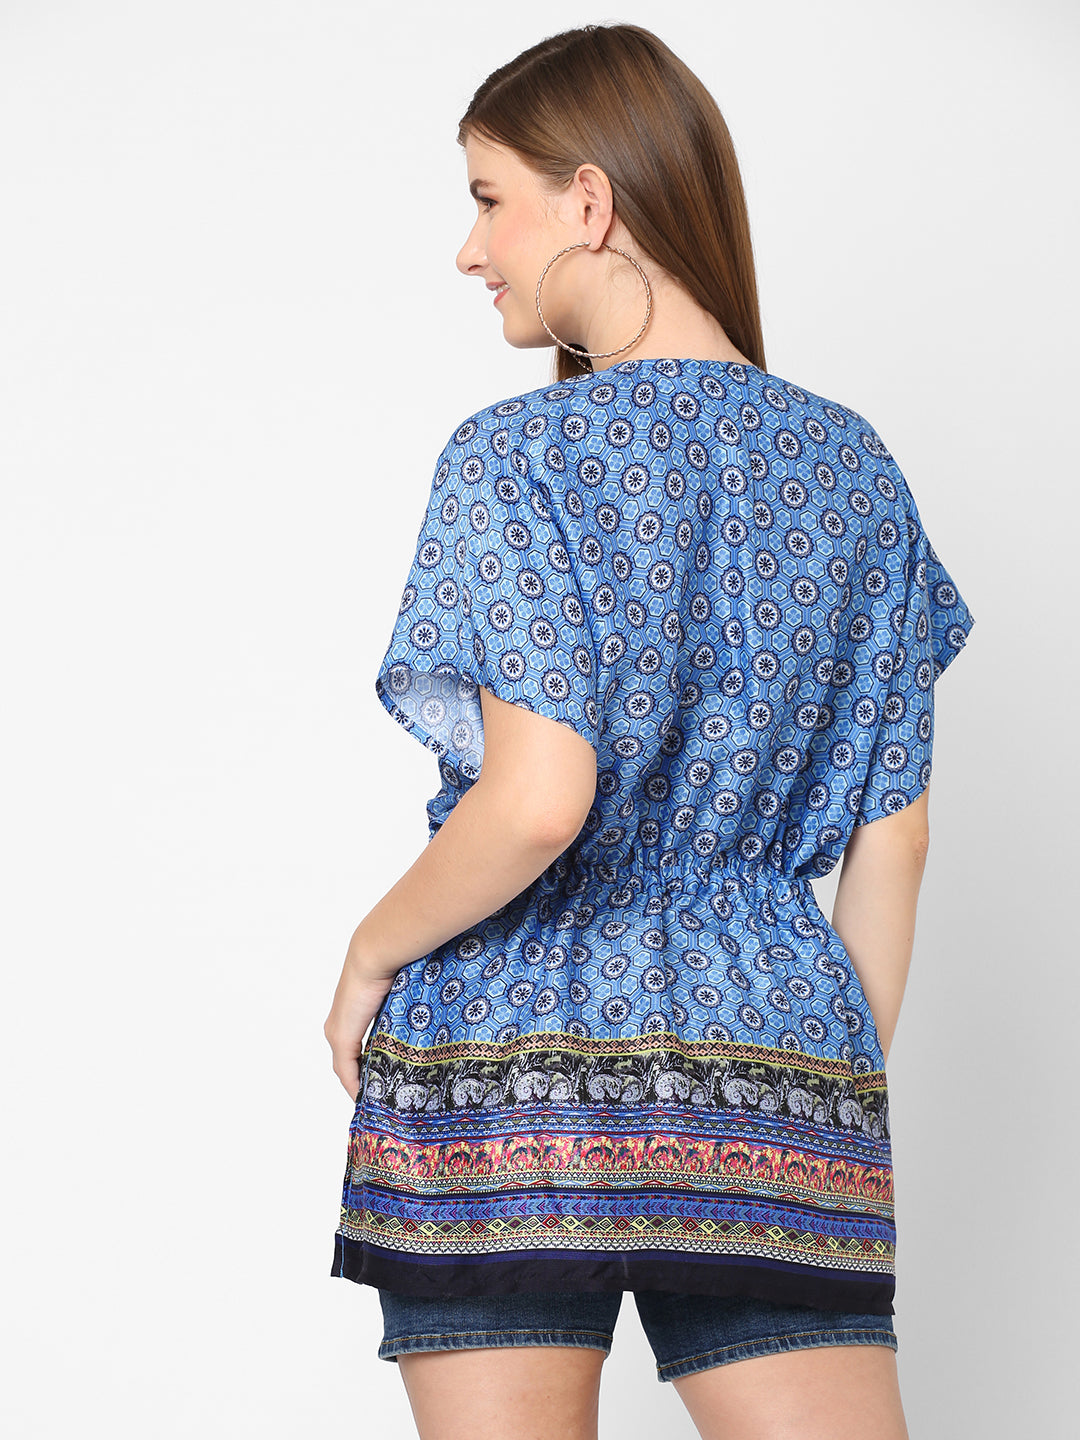 Blue Floral Printed Front Tie Top Poncho